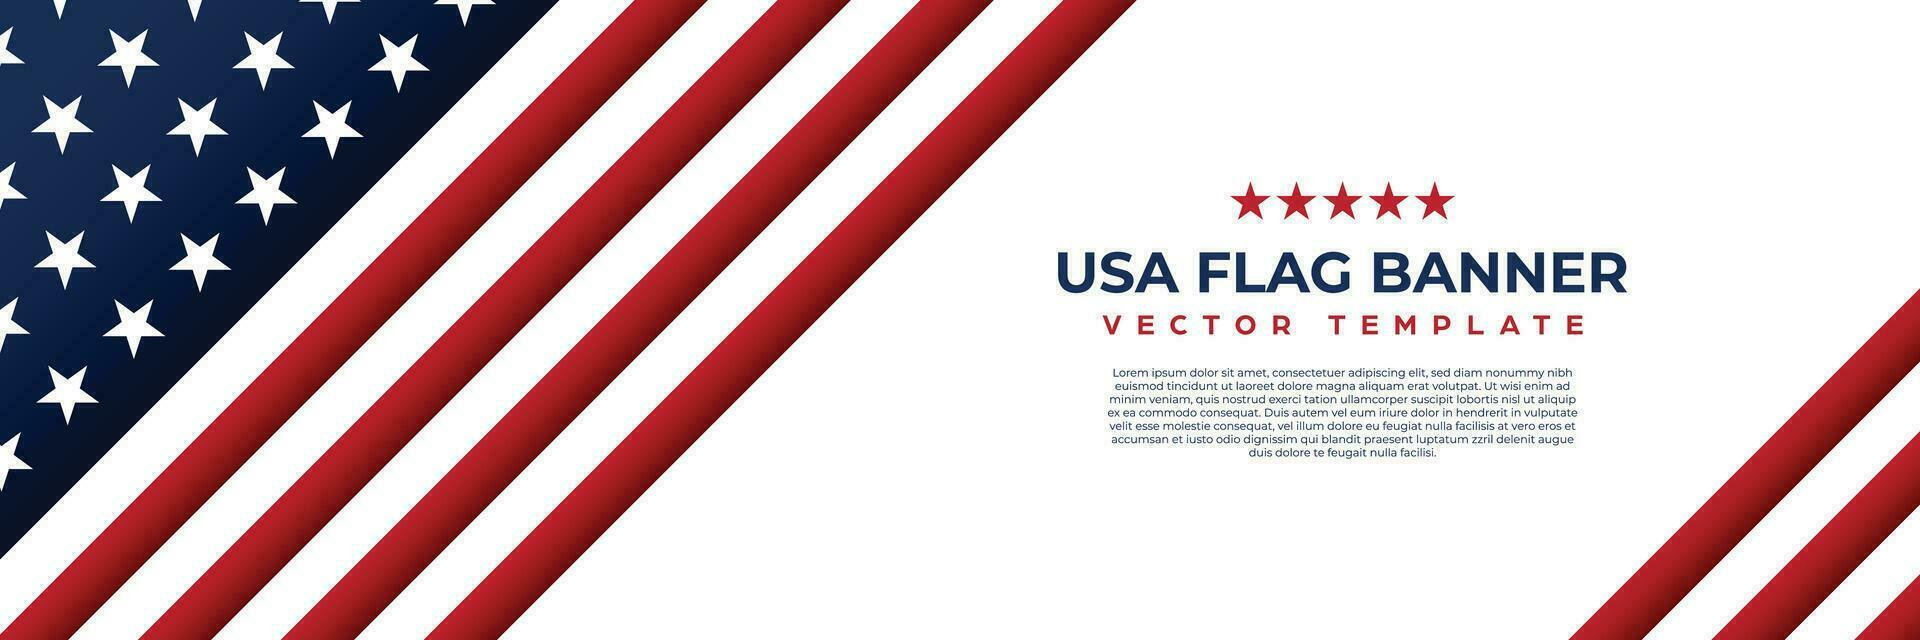 America banner design vector, USA flag background template for celebrate national day, 4th of july, memorial day event vector